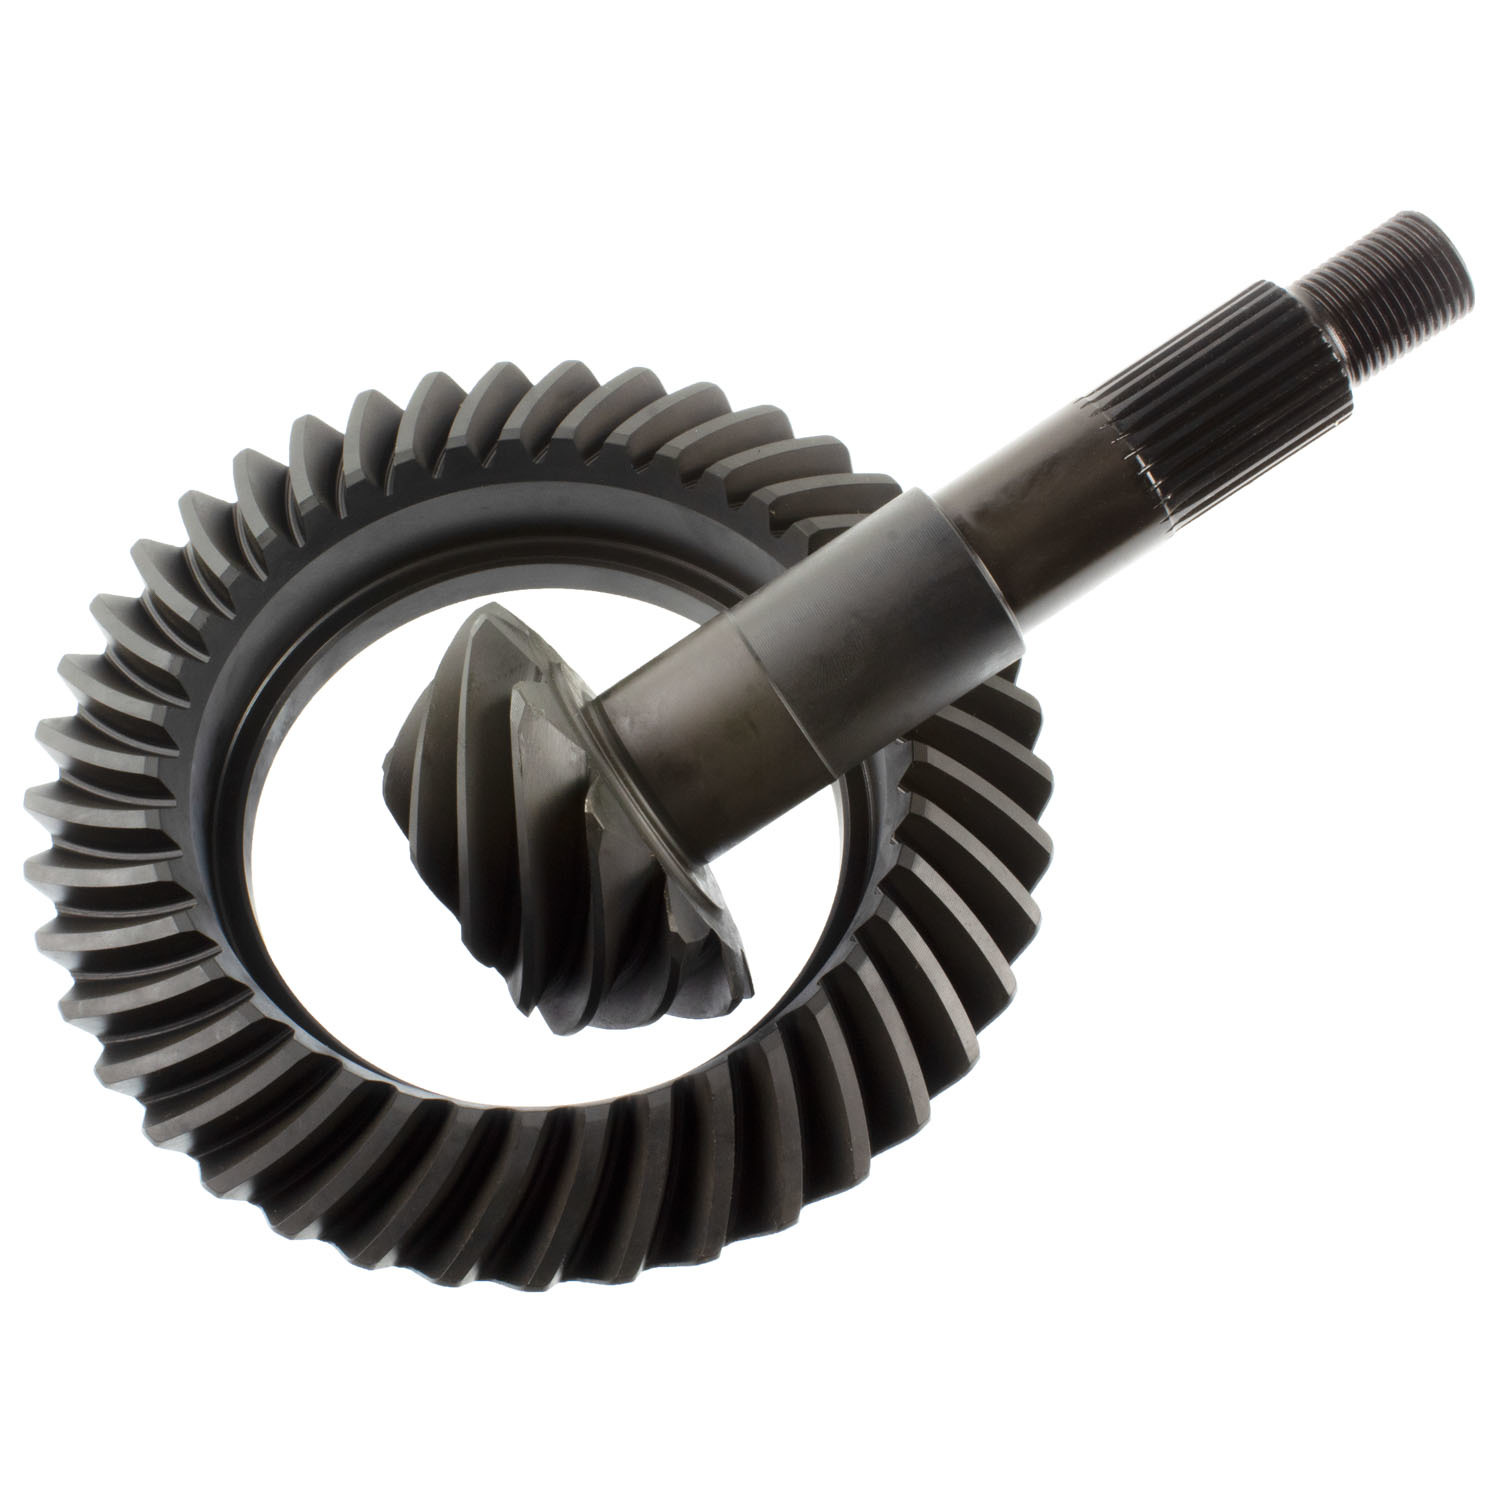 Richmond Gear 49-0007-1 Ring and Pinion, 3.73 Ratio, 27 Spline Pinion, 2 Series, Thick Gear, 7.5 in / 7.625 in, GM 10-Bolt, Kit